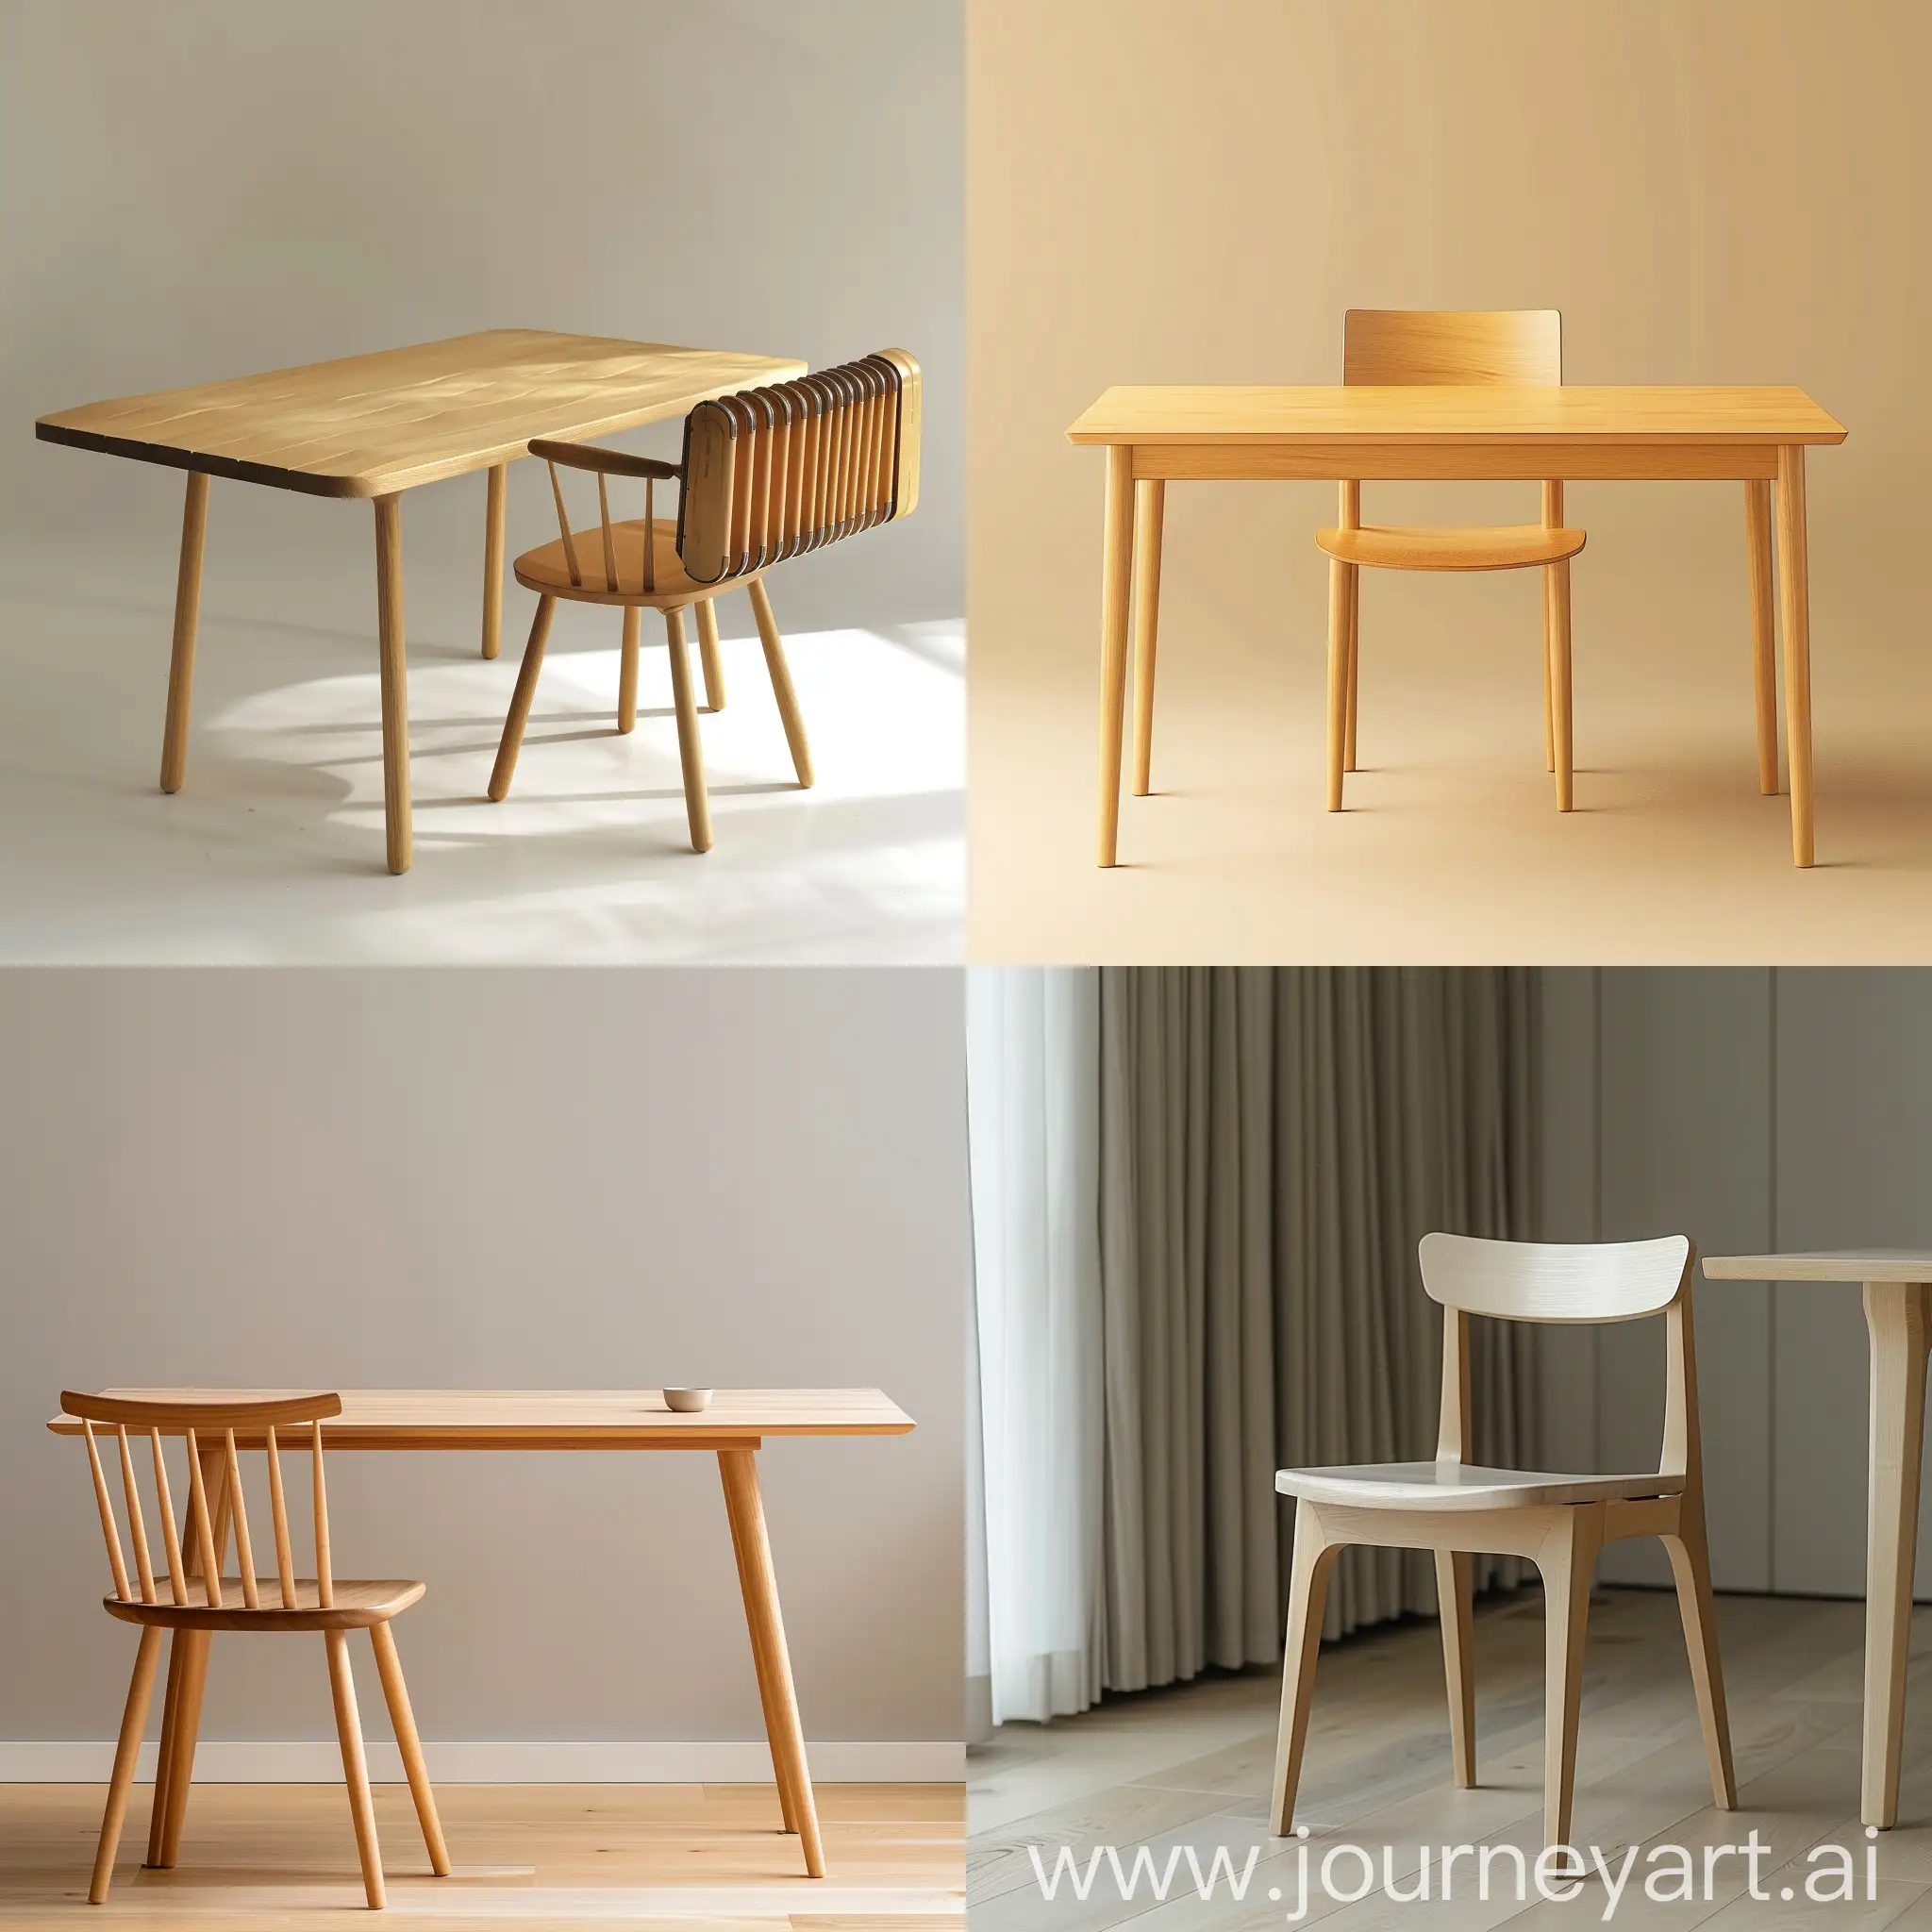 Japandi-Minimalism-Sleek-Dining-Table-and-Chair-Design-with-Japanese-and-Scandinavian-Influence